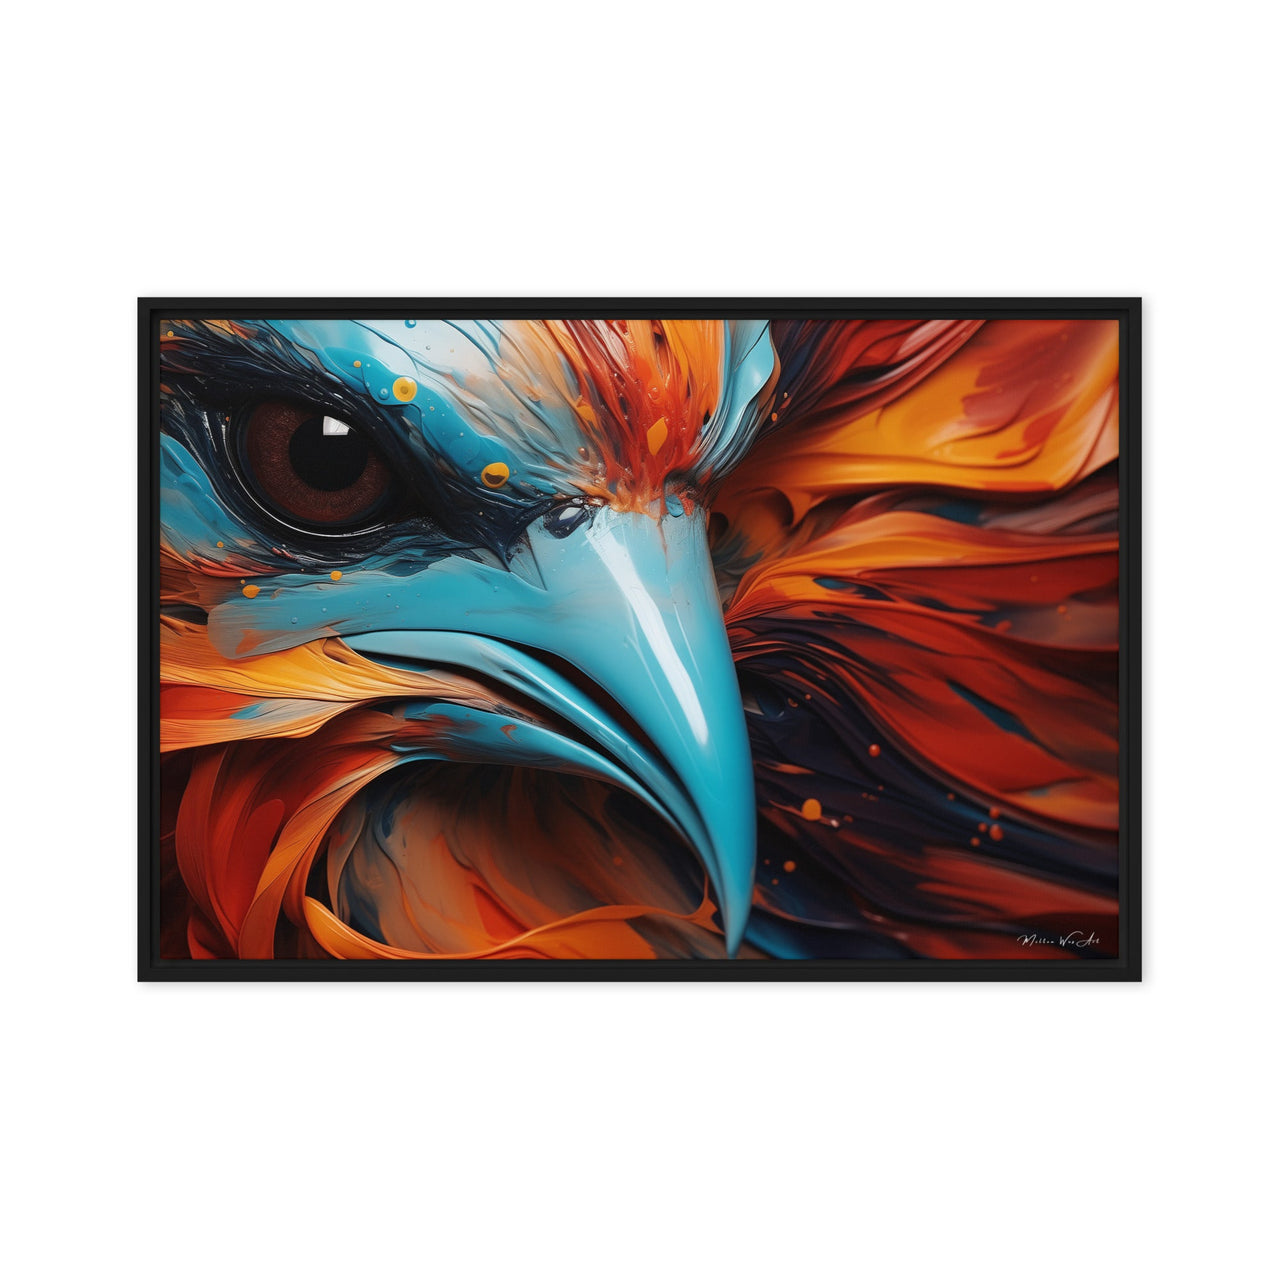 Intense and vivid framed canvas print of an eagle's gaze, with fiery orange feathers, by Milton Wes Art, mounted on a minimalist white wall above a sleek teal daybed, adding a powerful aesthetic to the room.